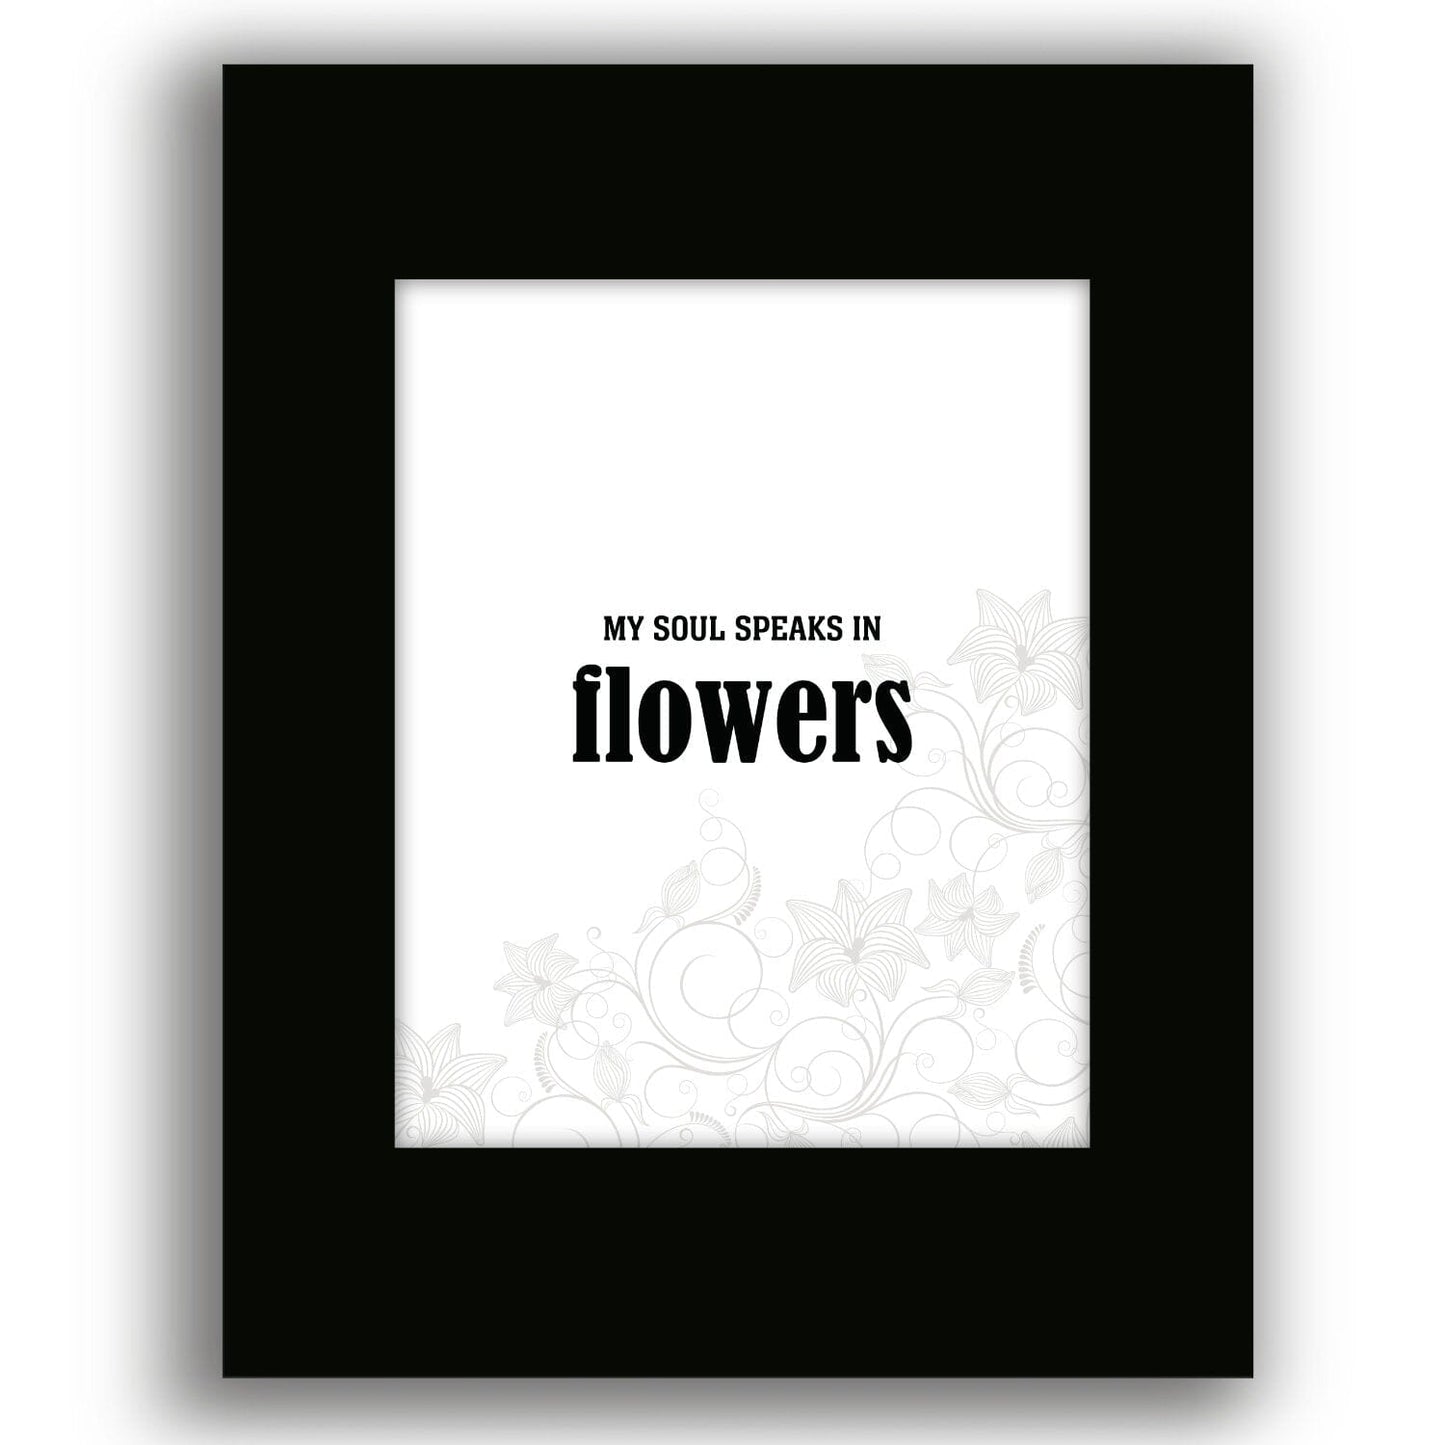 My Soul Speaks in Flowers - Wise and Witty Quote Wall Print Wise and Wiseass Quotes Song Lyrics Art 8x10 Black Matted Print 